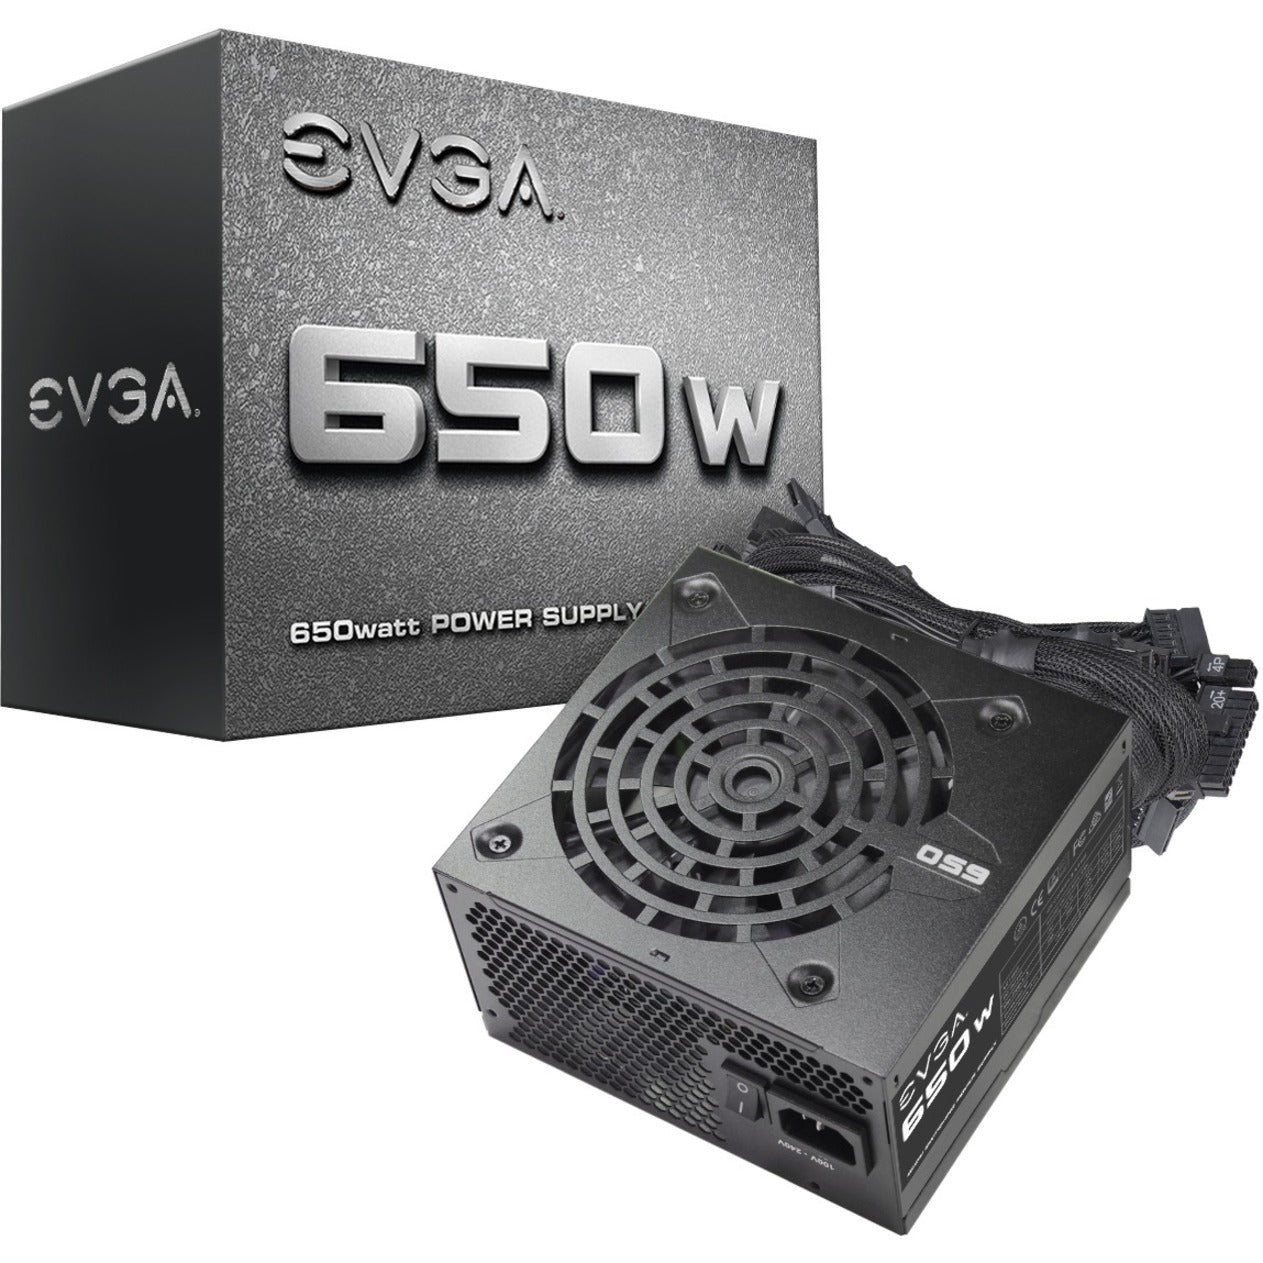 EVGA 100-N1-0650-L1 650W Power Supply, Reliable and Efficient Energy Source for Your System